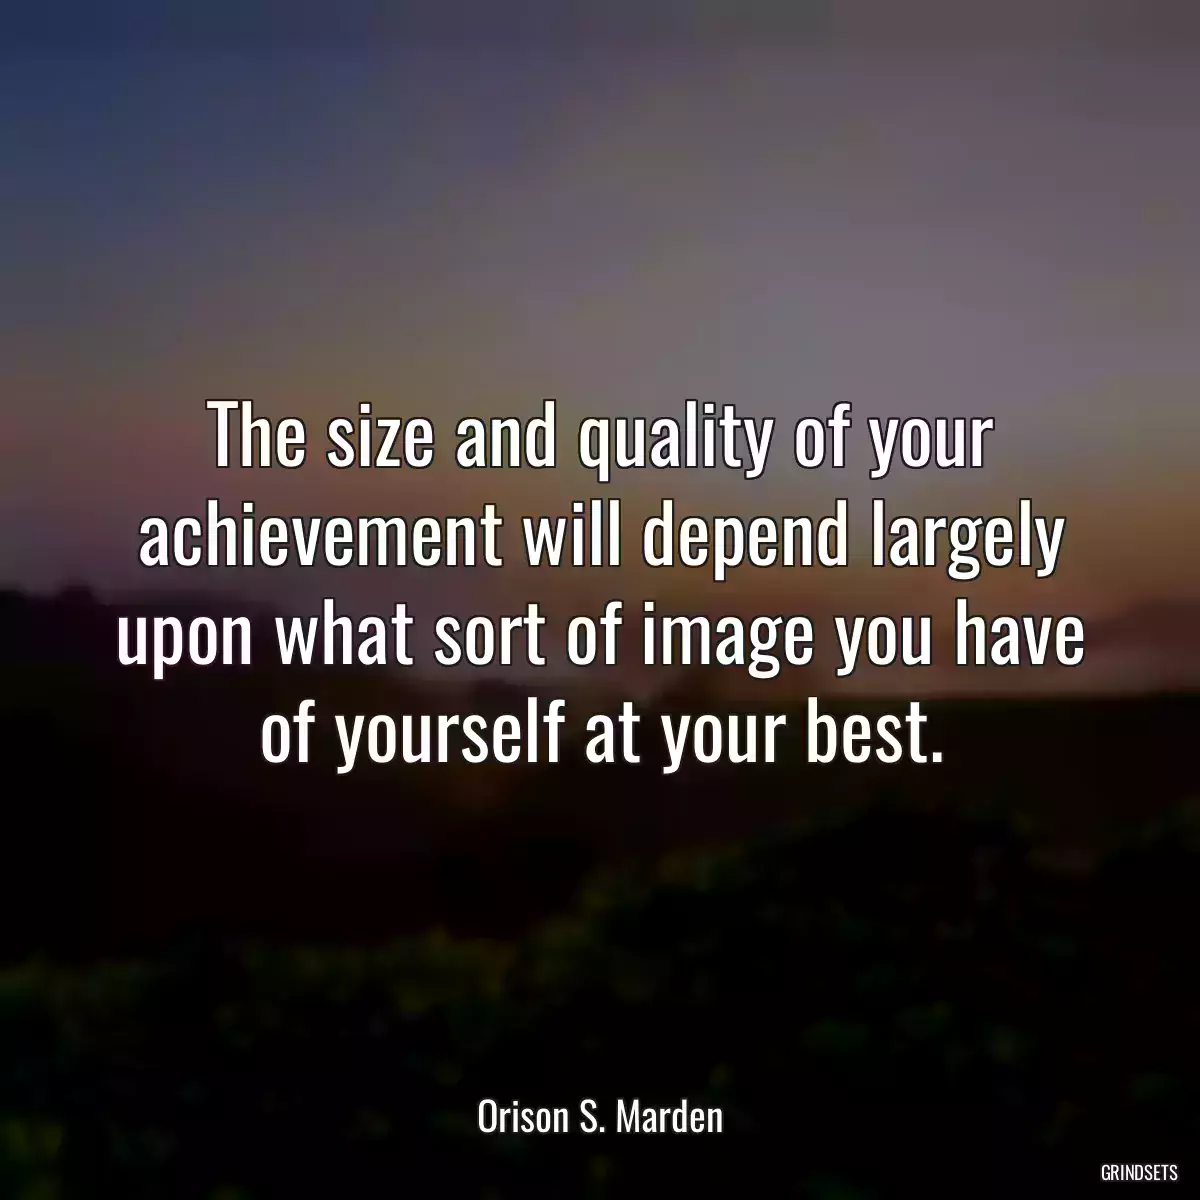 The size and quality of your achievement will depend largely upon what sort of image you have of yourself at your best.